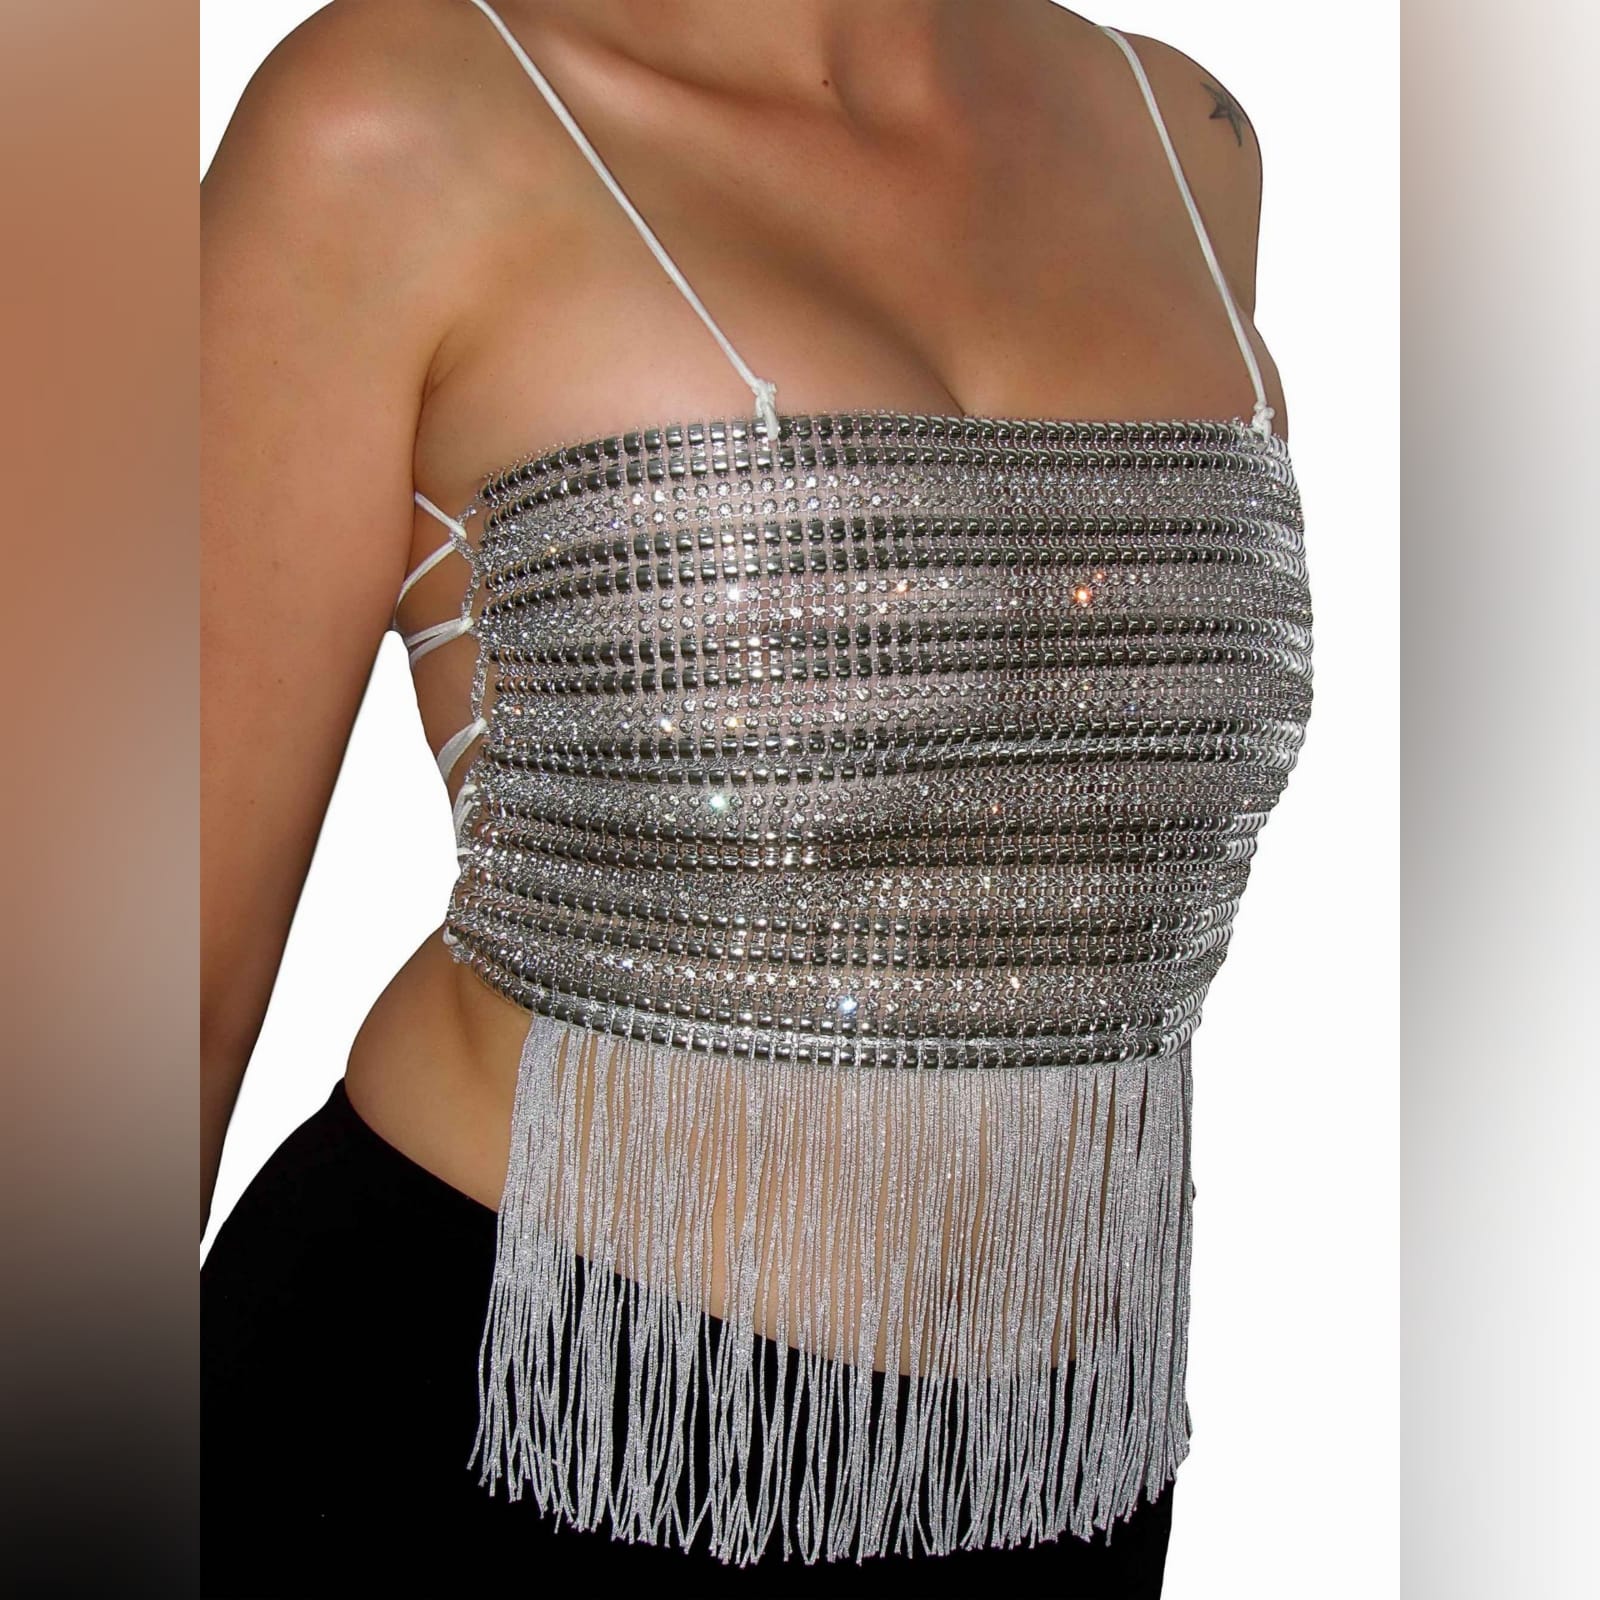 Silver striped diamante top 1 silver striped diamante top, a one of a kind. Handmade crop top with a fun tassel hemline. This open-back top has an elasticated white rope to create a lace-up, also helps to adjust to fit.